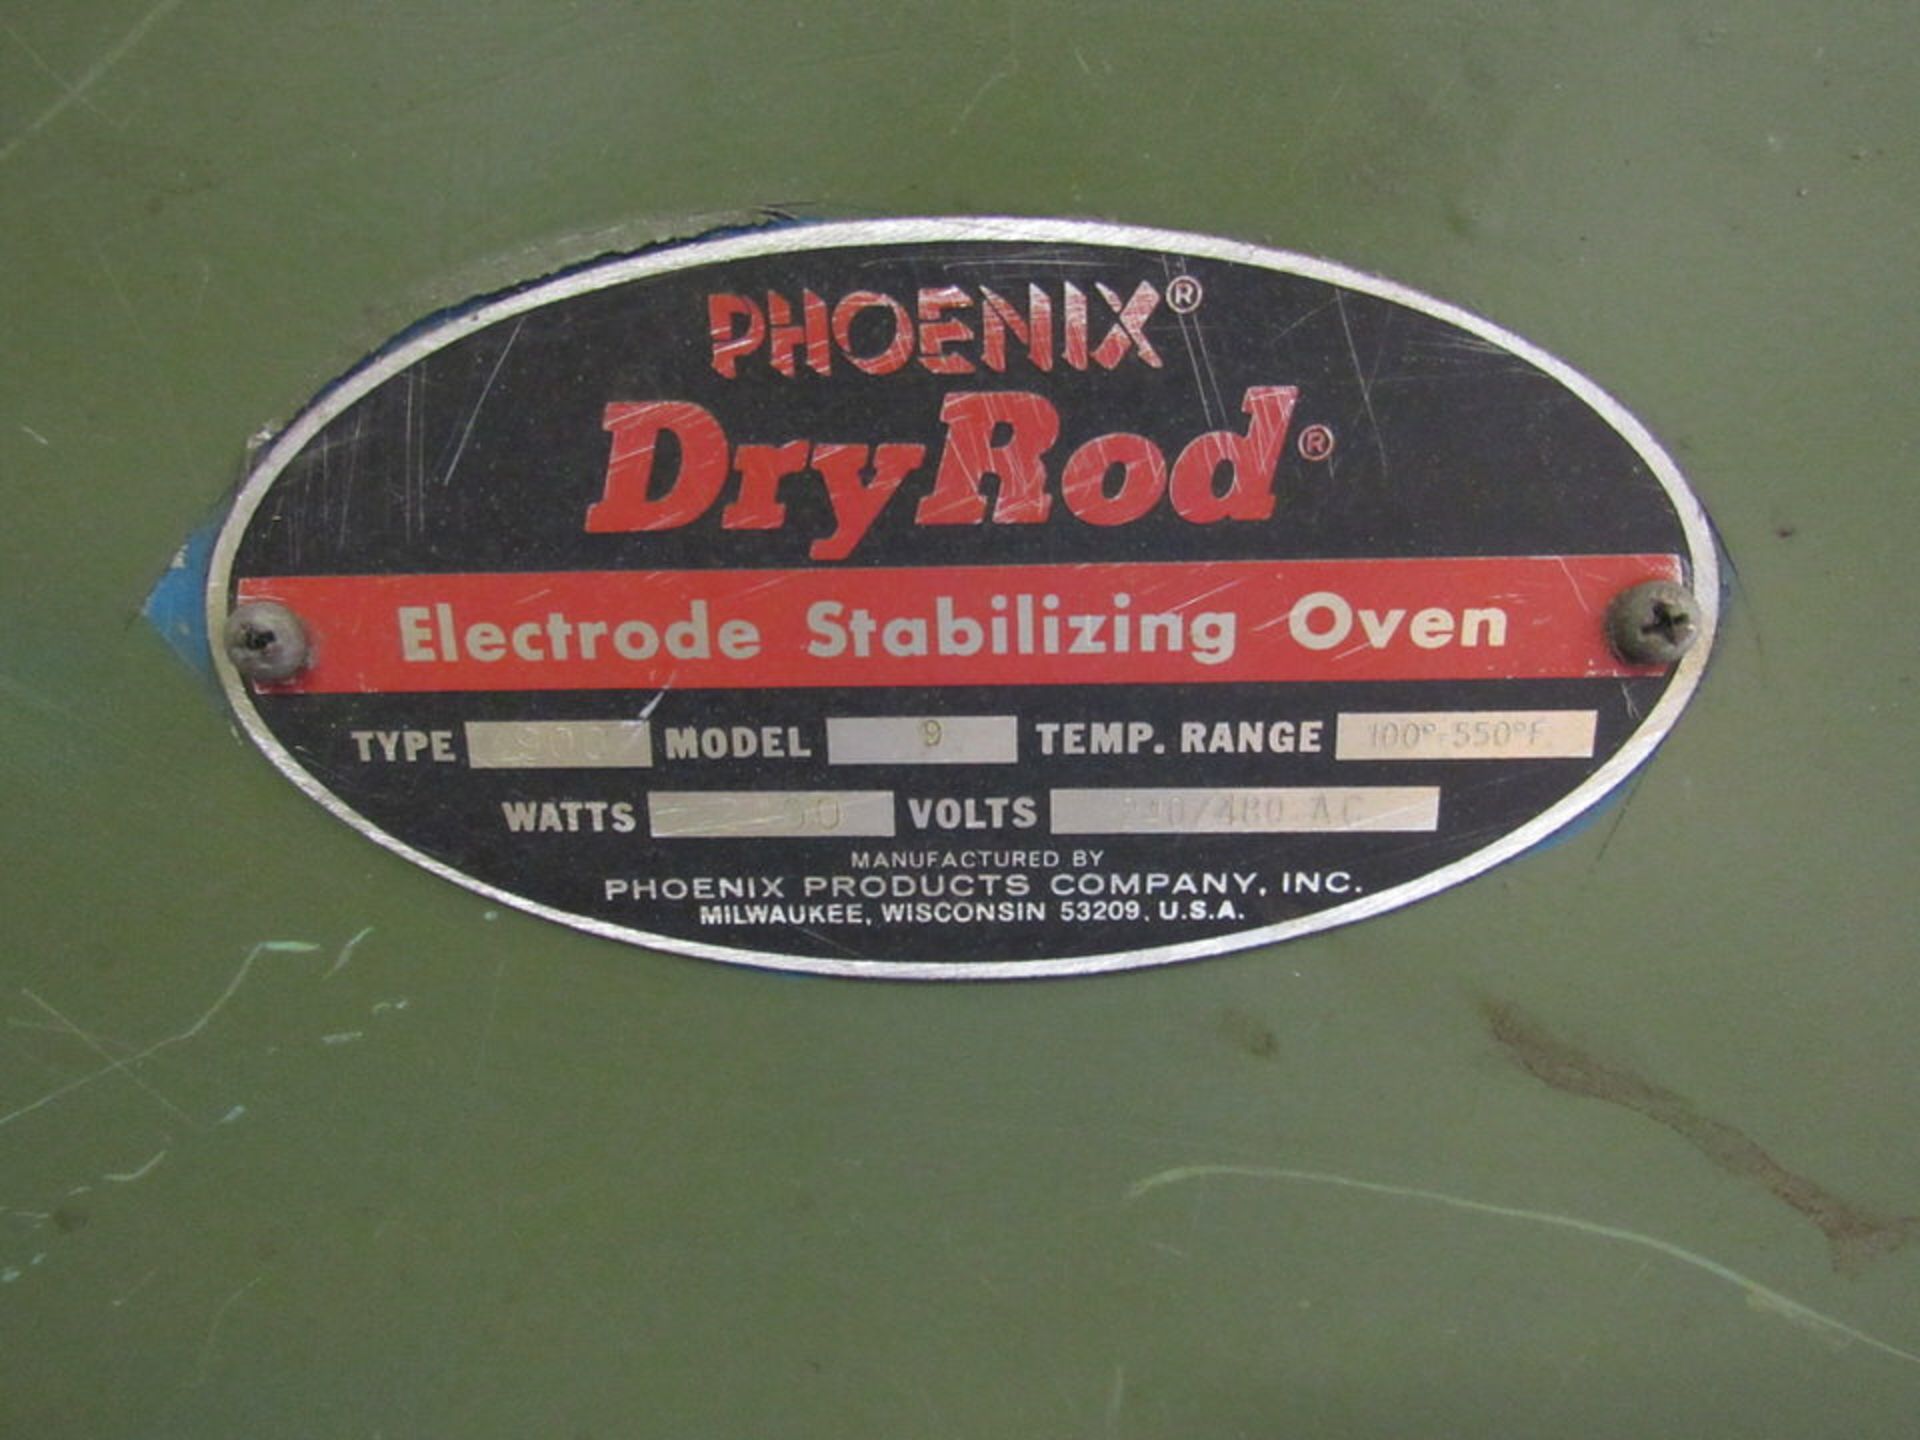 Phoenix Electrode Stabilizing Oven Model 9 Dry Rod Oven - Image 2 of 4